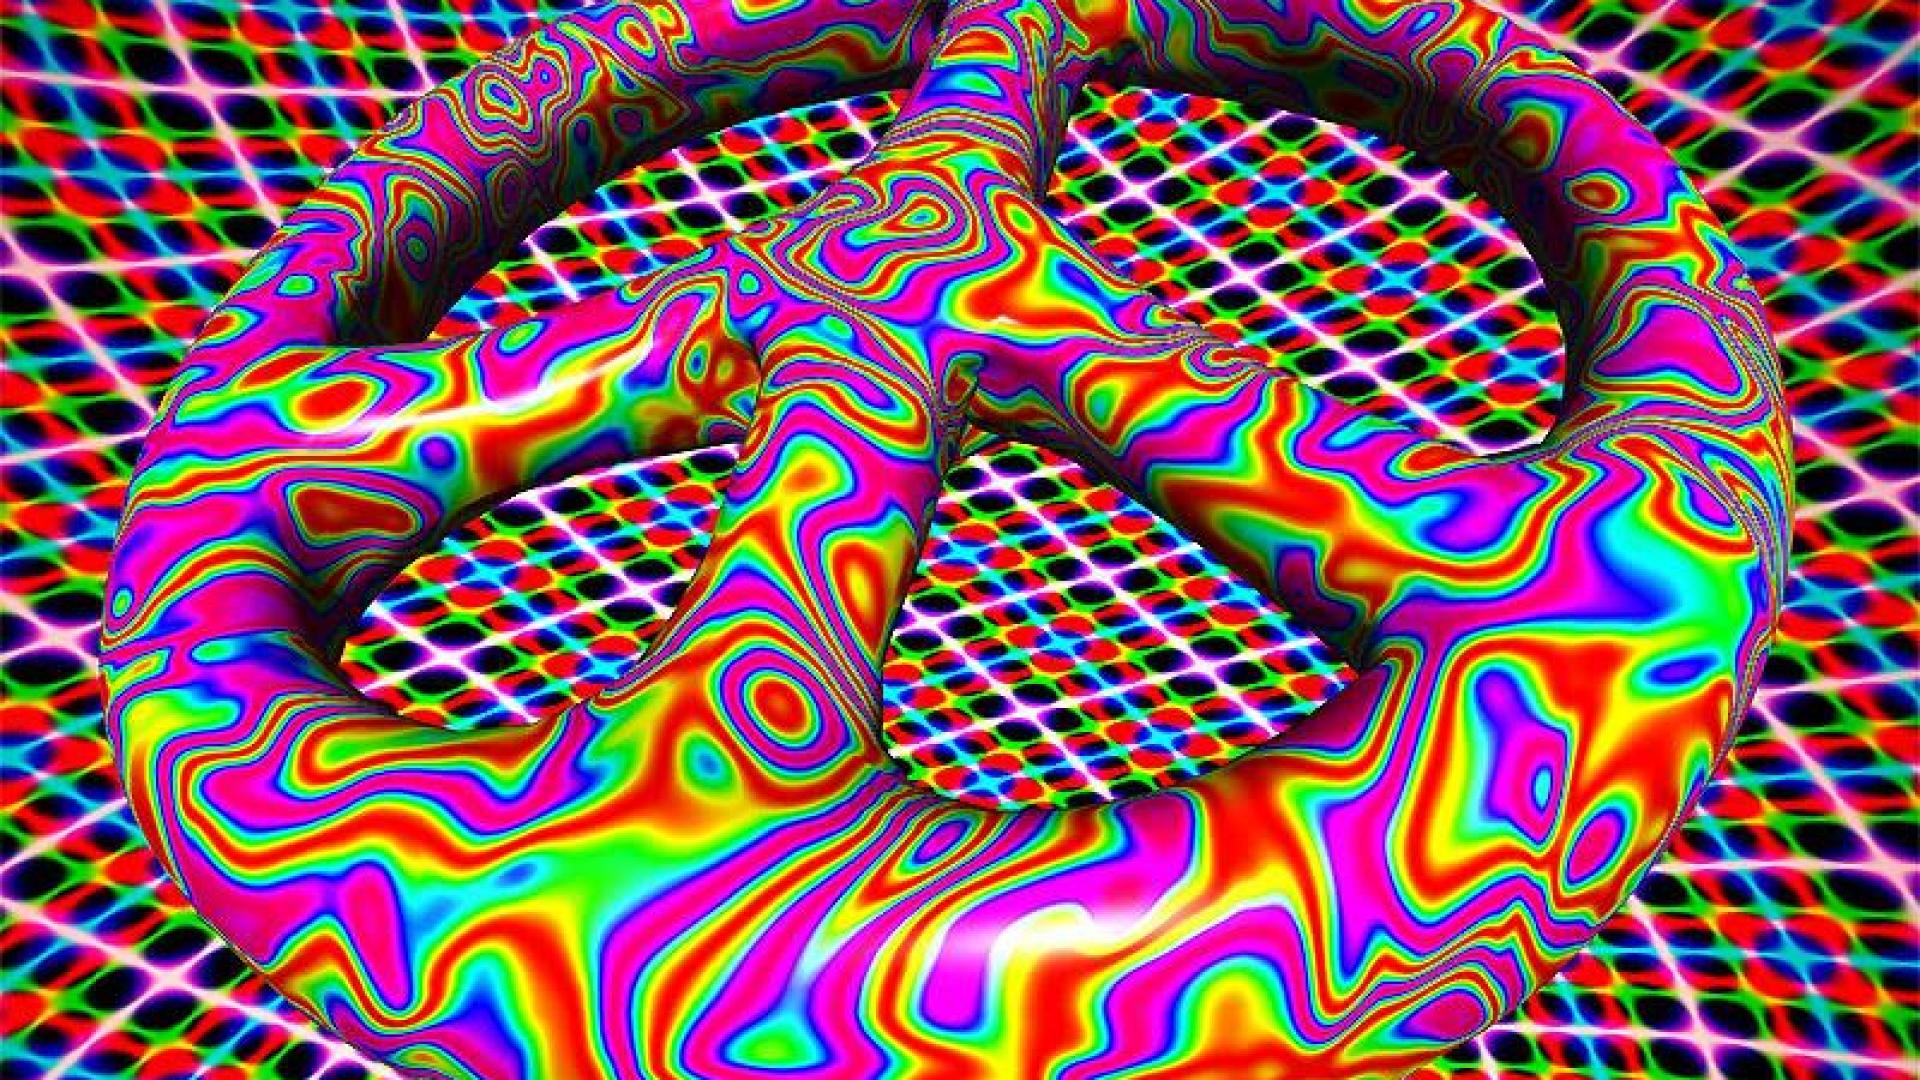 Psychedelic Trippy Wallpapers Hd - HD Wallpaper 